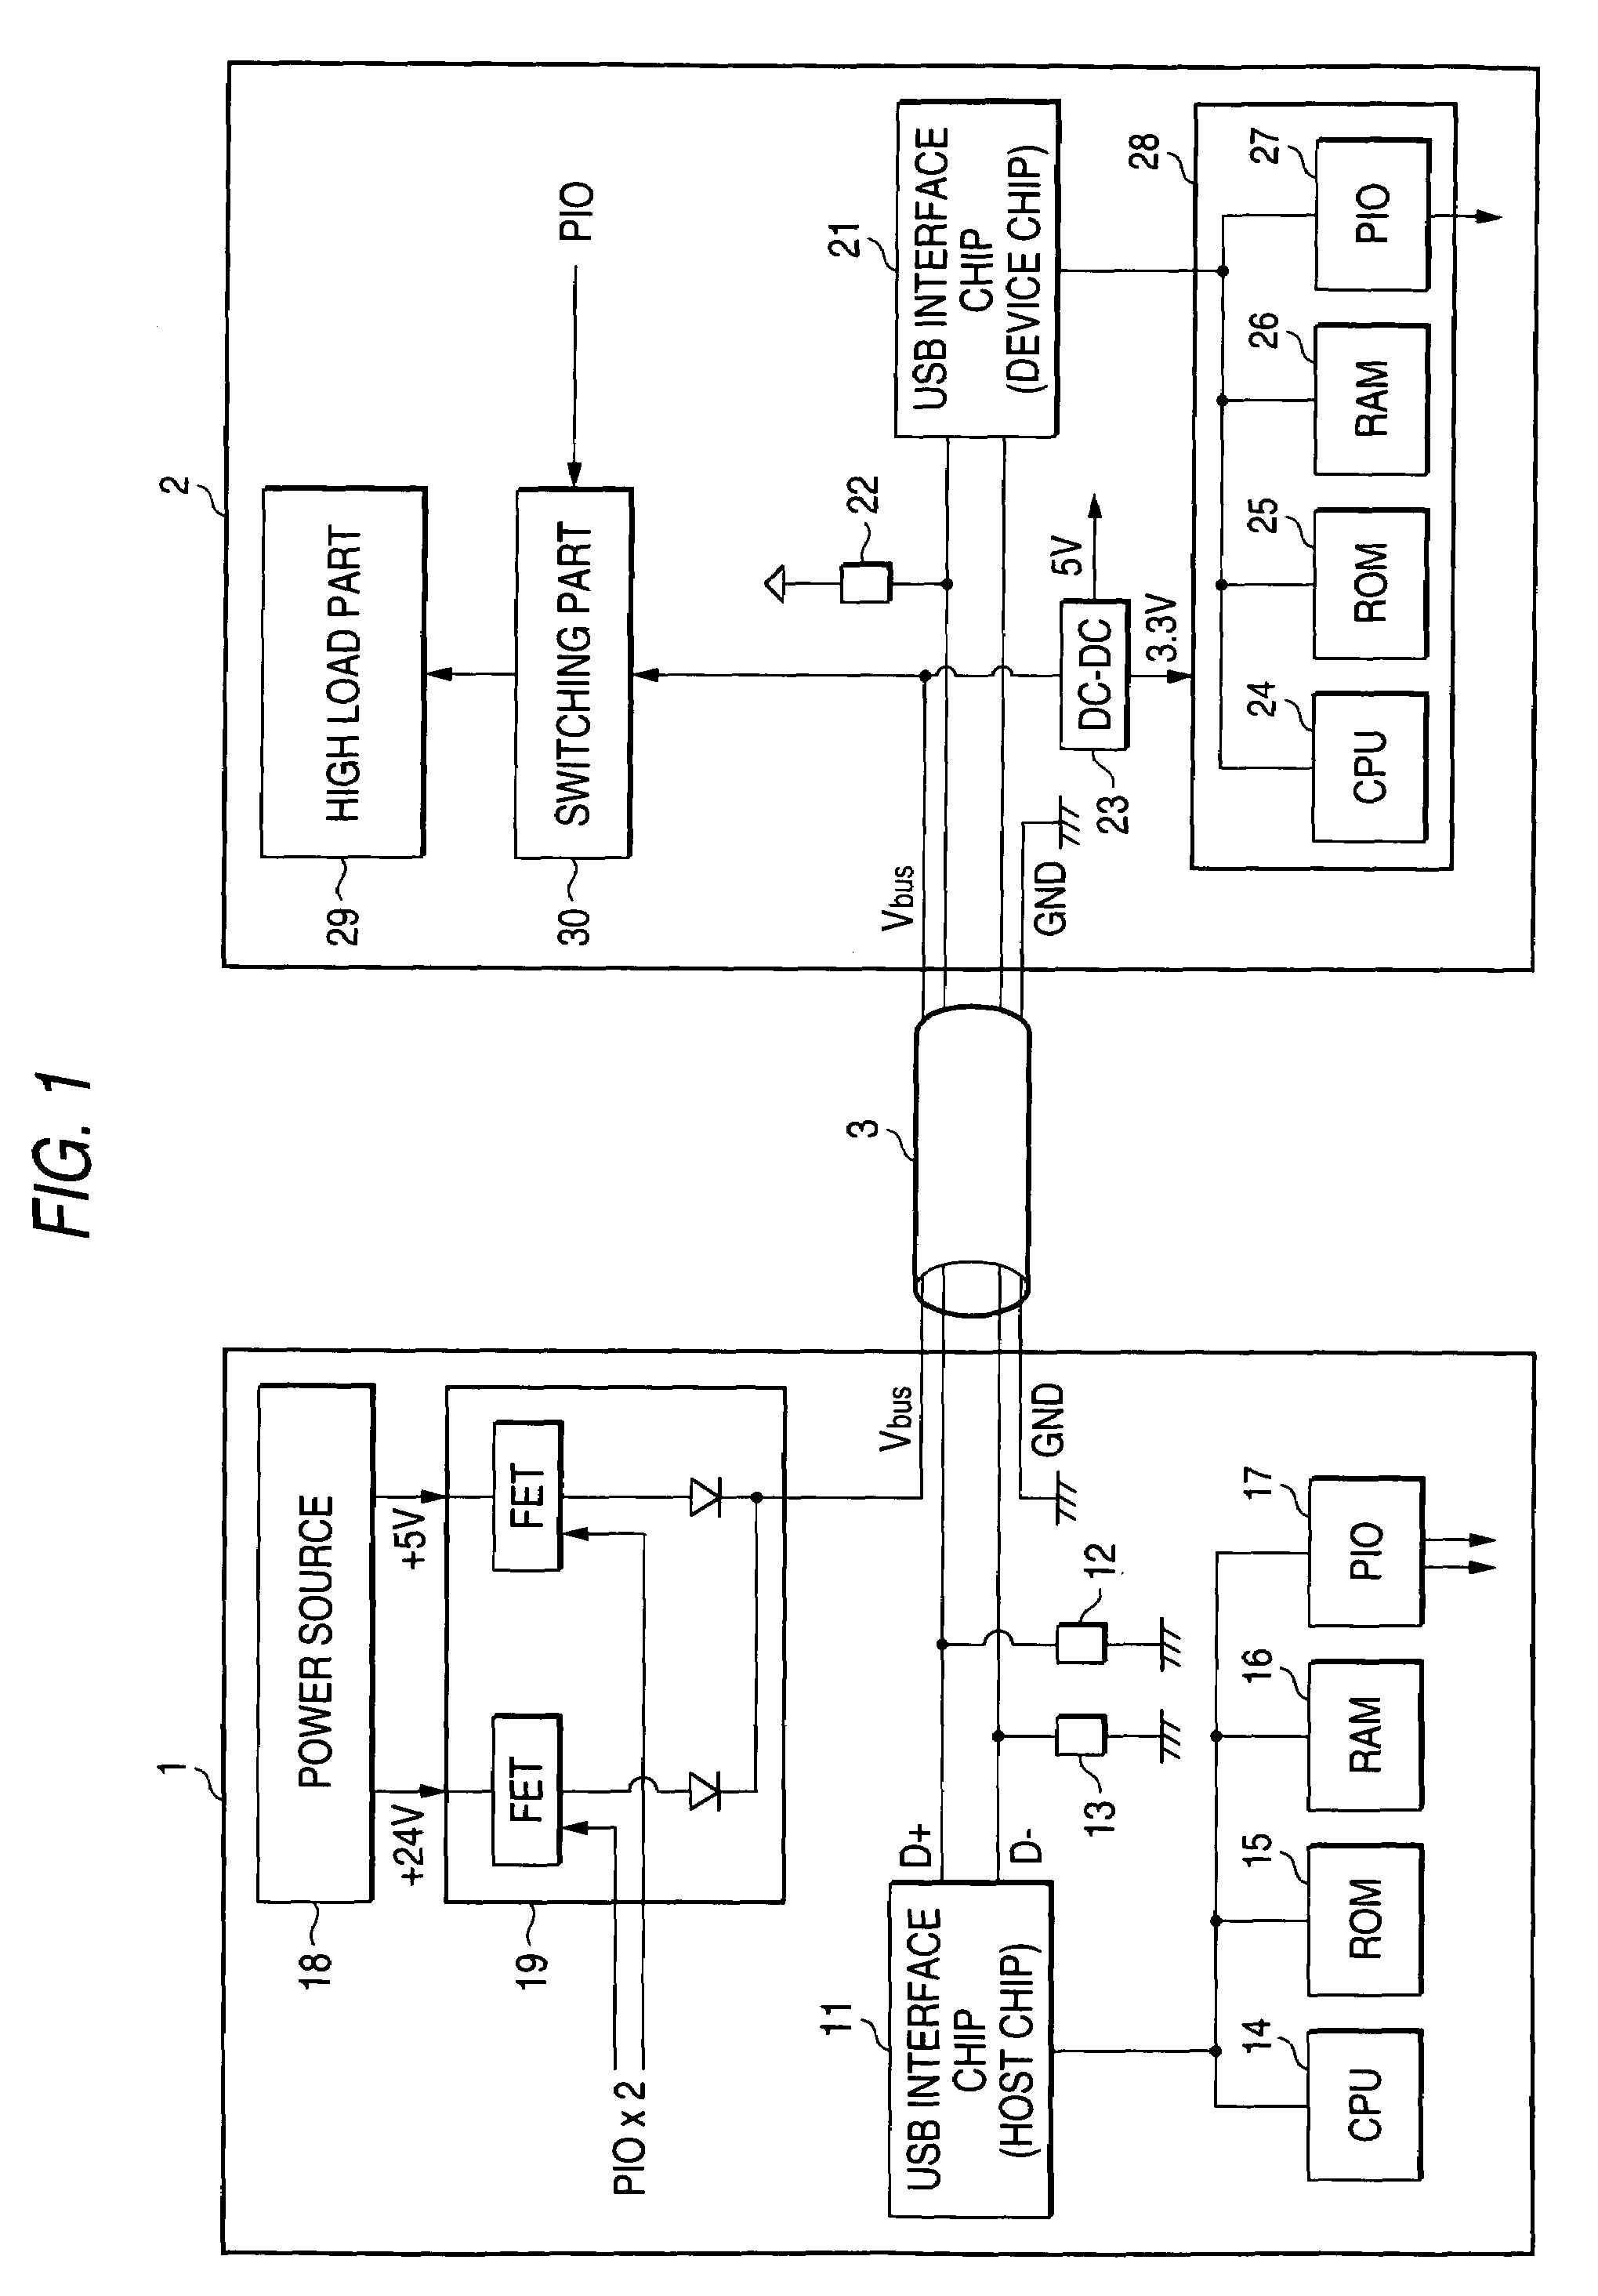 USB device that provides power that is different from power prescribed in the USB standard